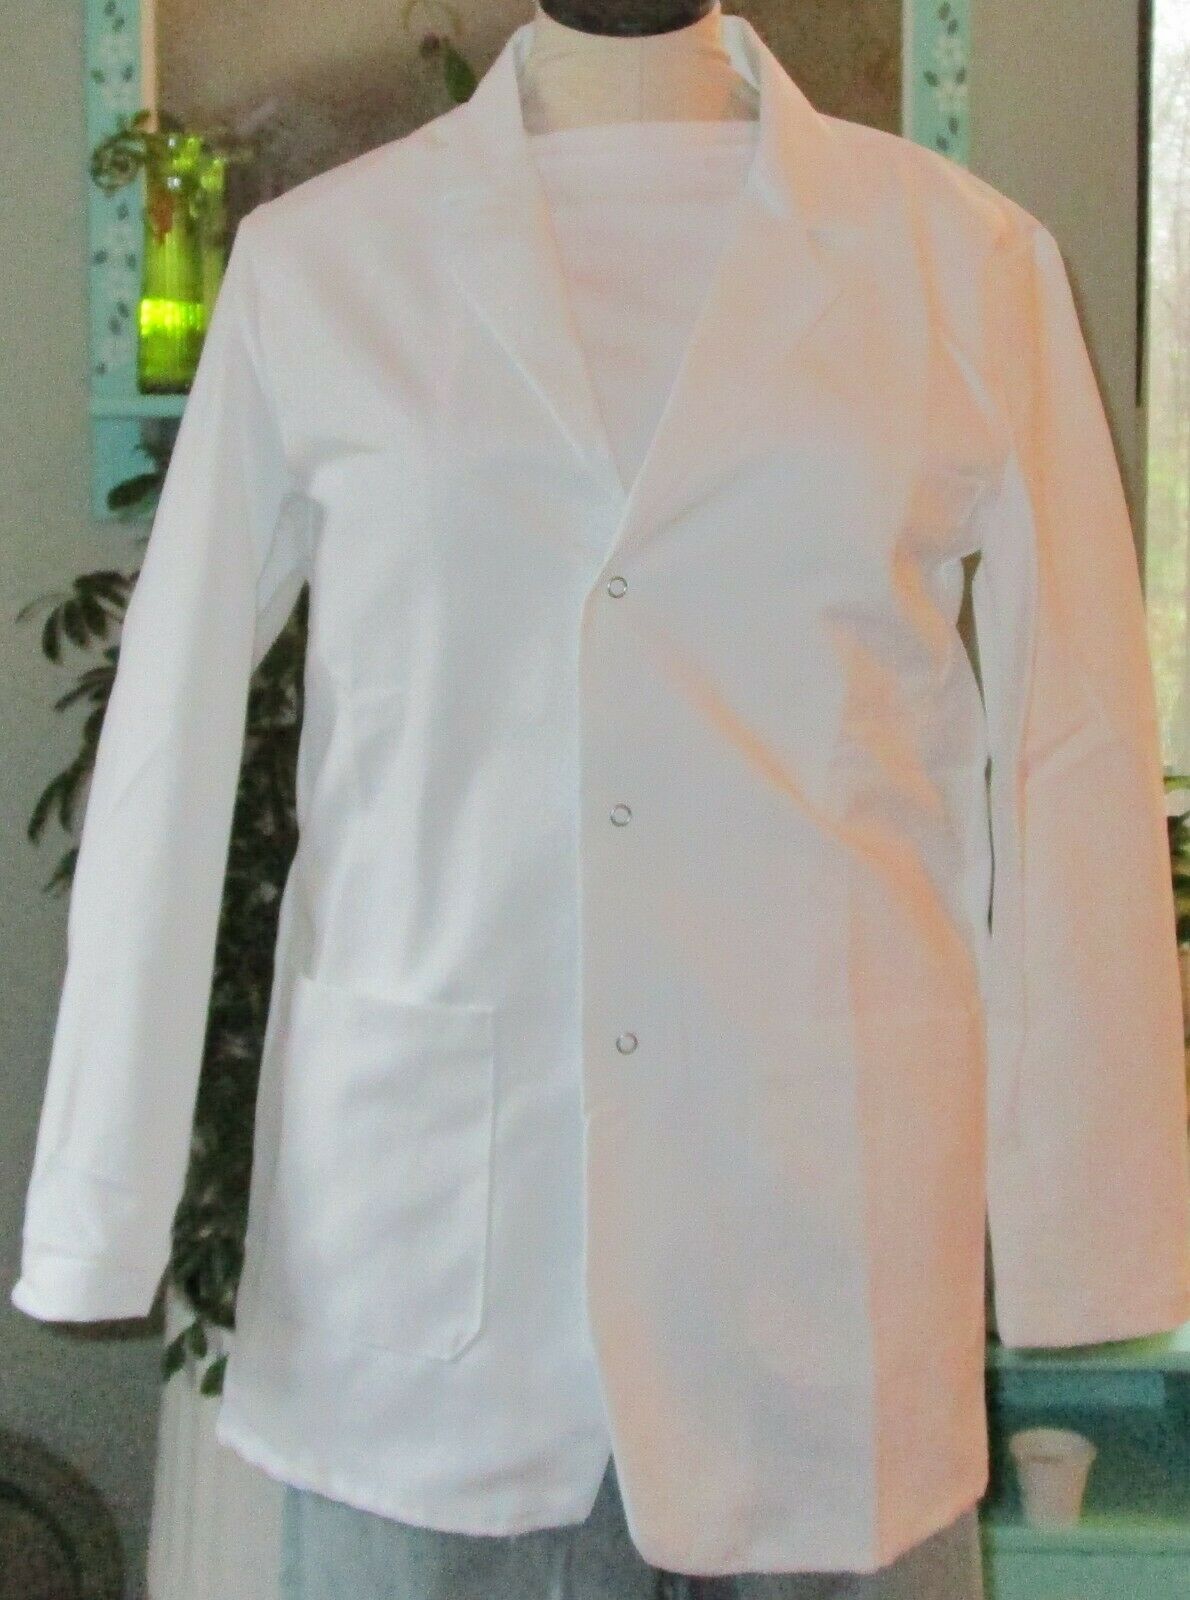 Best Medical Woman Staff L/s Lab Coat Snap 3 Pocket 30" Length White Sz Xs To 2x